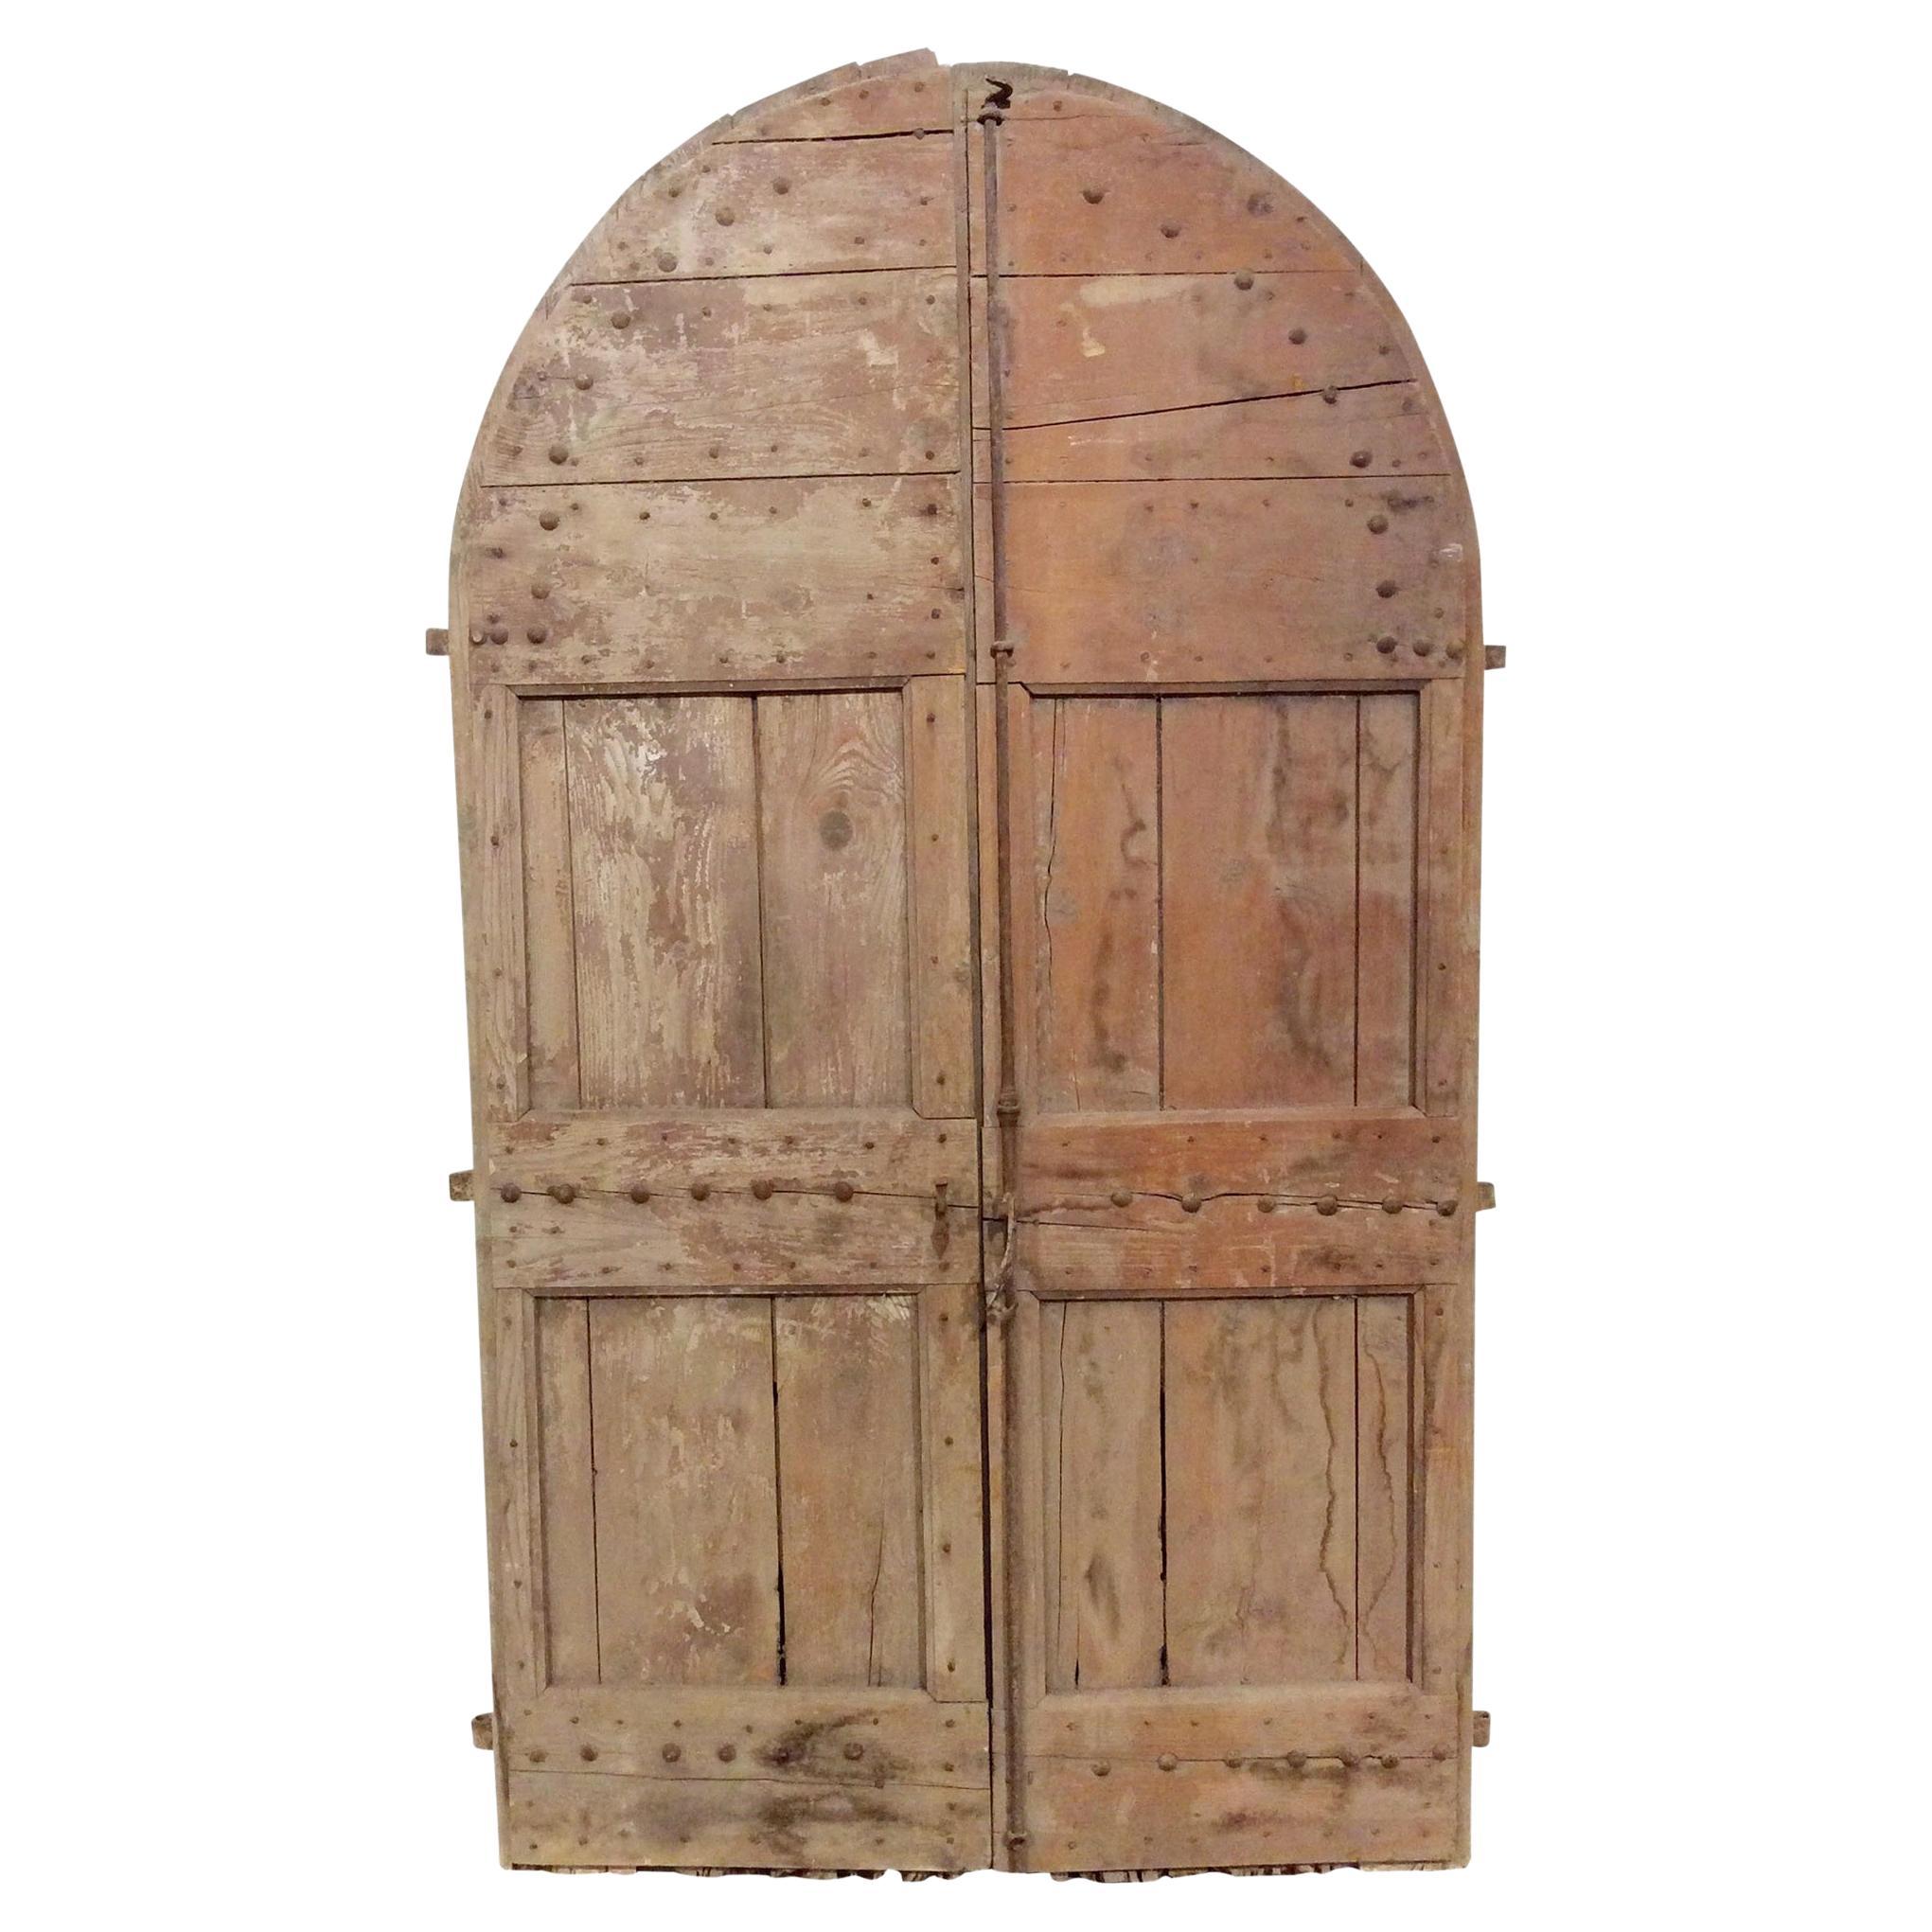 Early 1800s French Architectural Pine Arched Doors with Original Iron Hardware